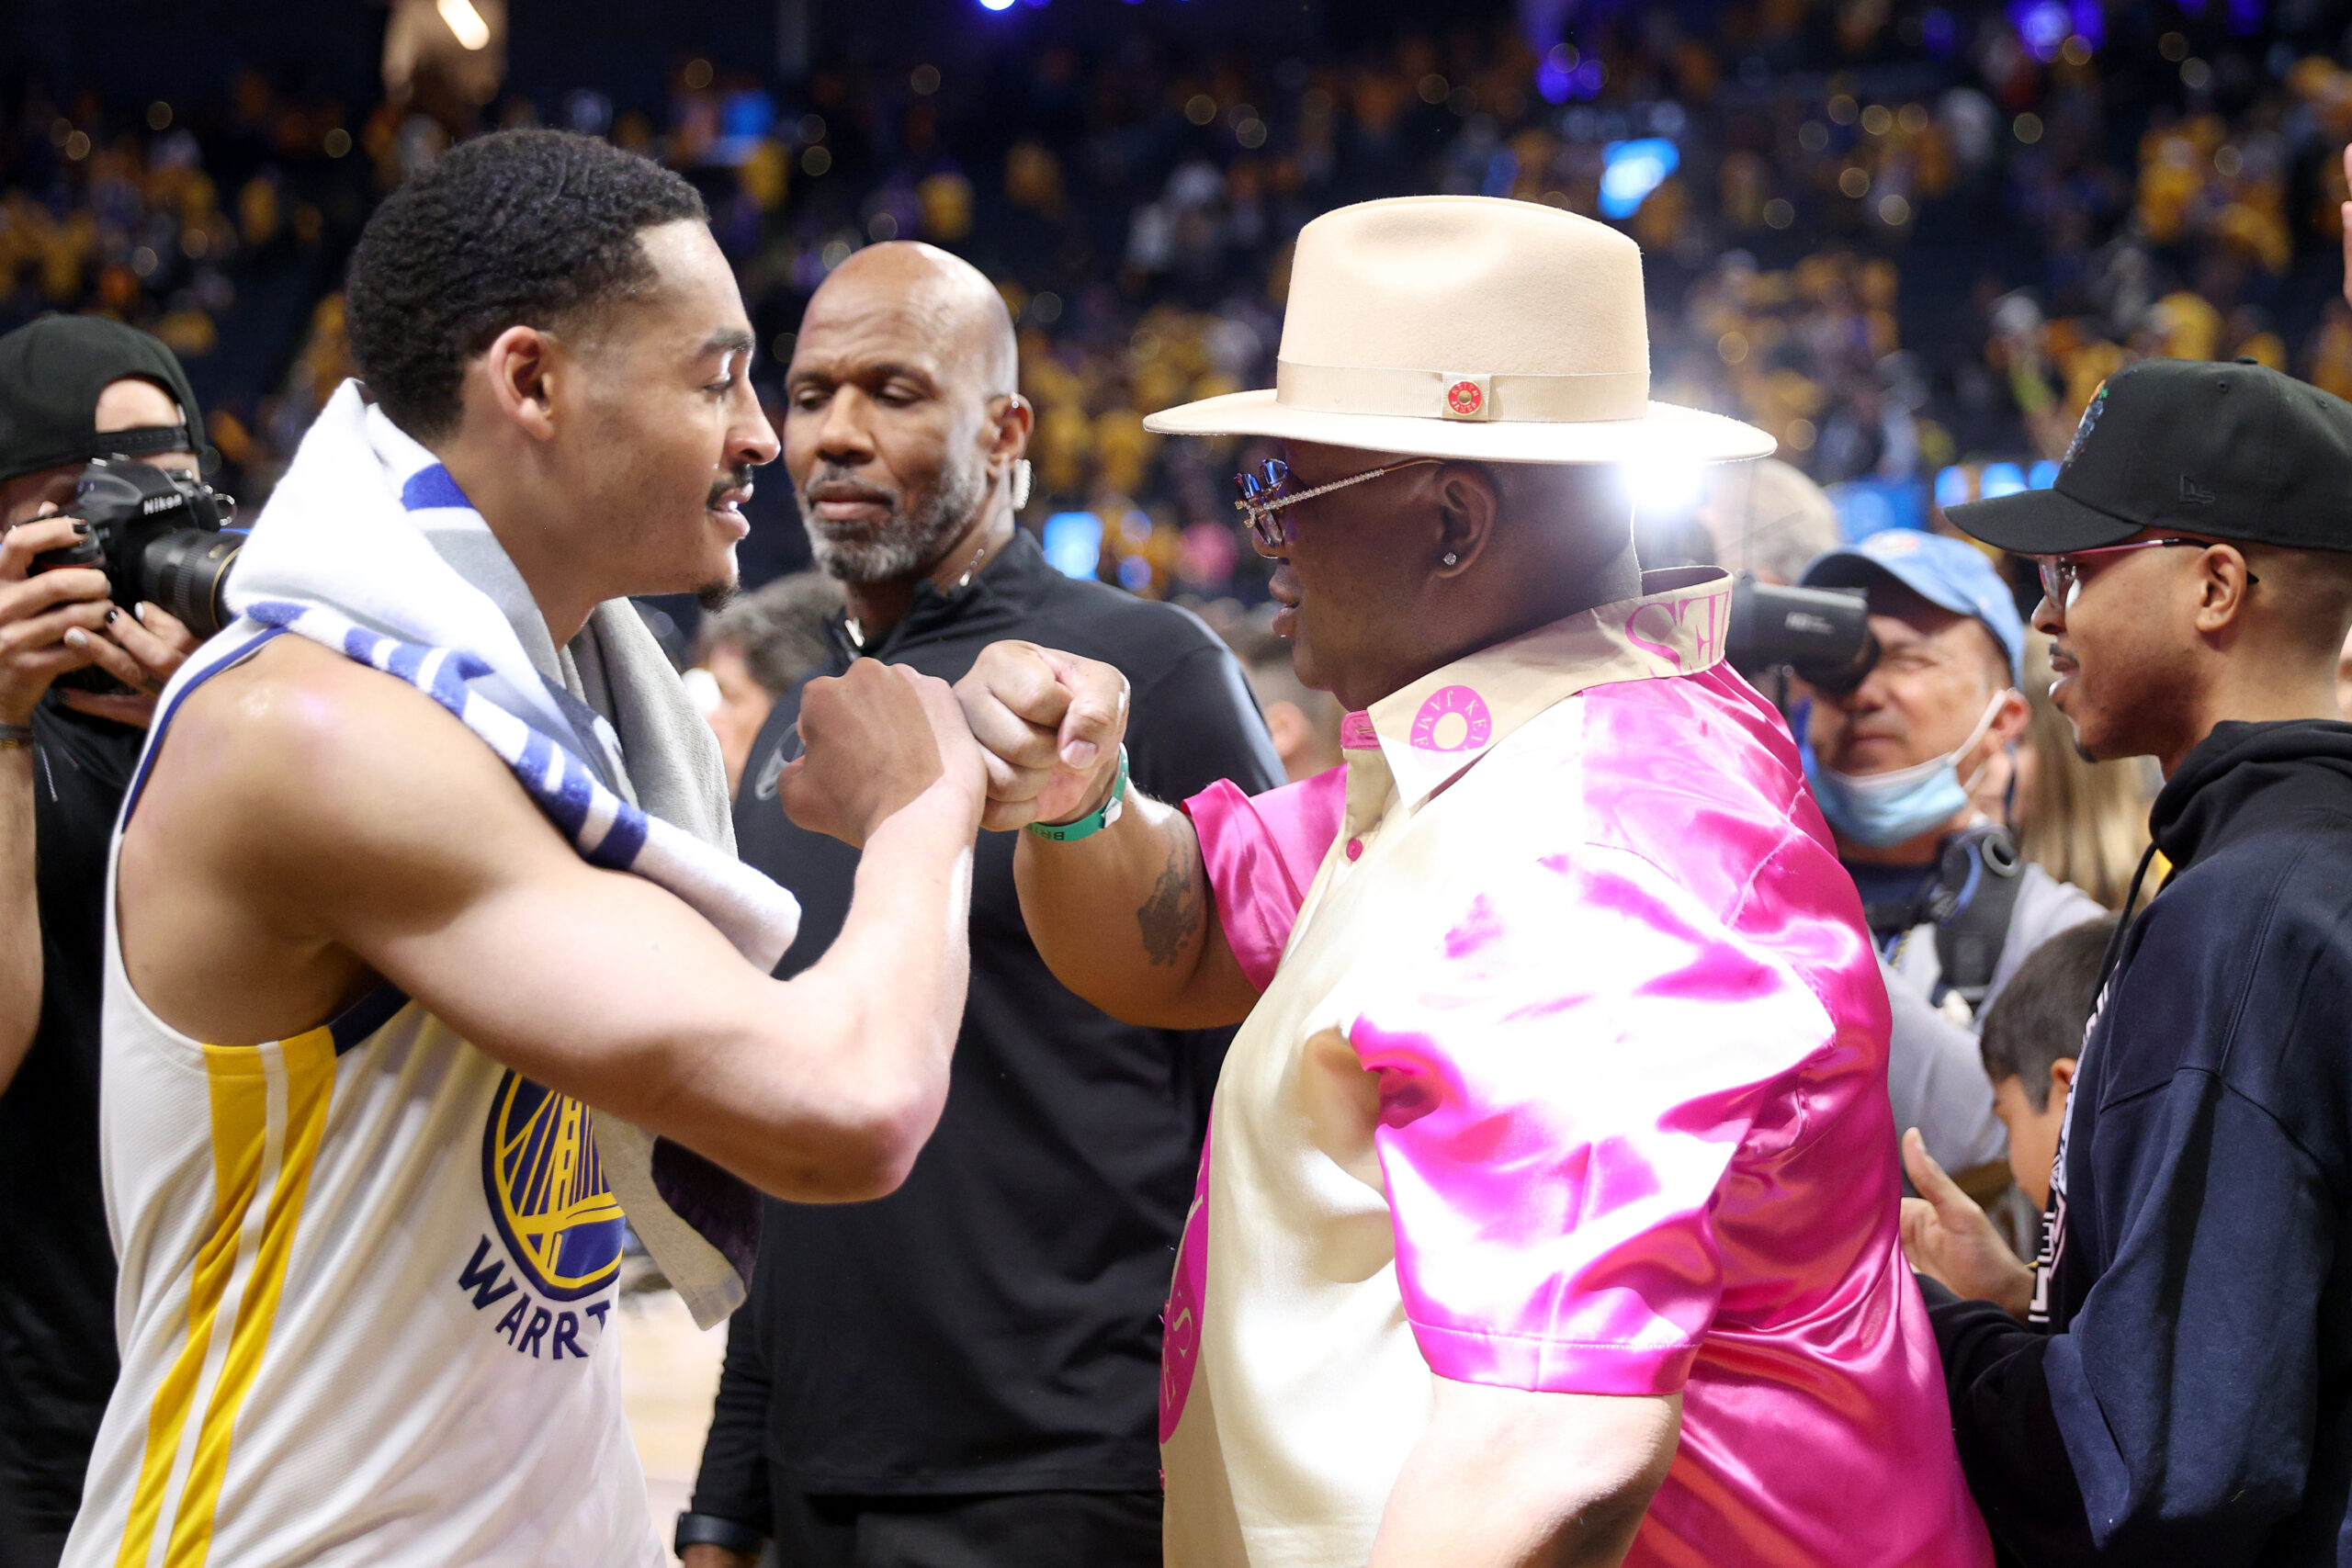 Twitter reacts to the outfit rapper E-40 wore to Game 4 of the NBA Finals